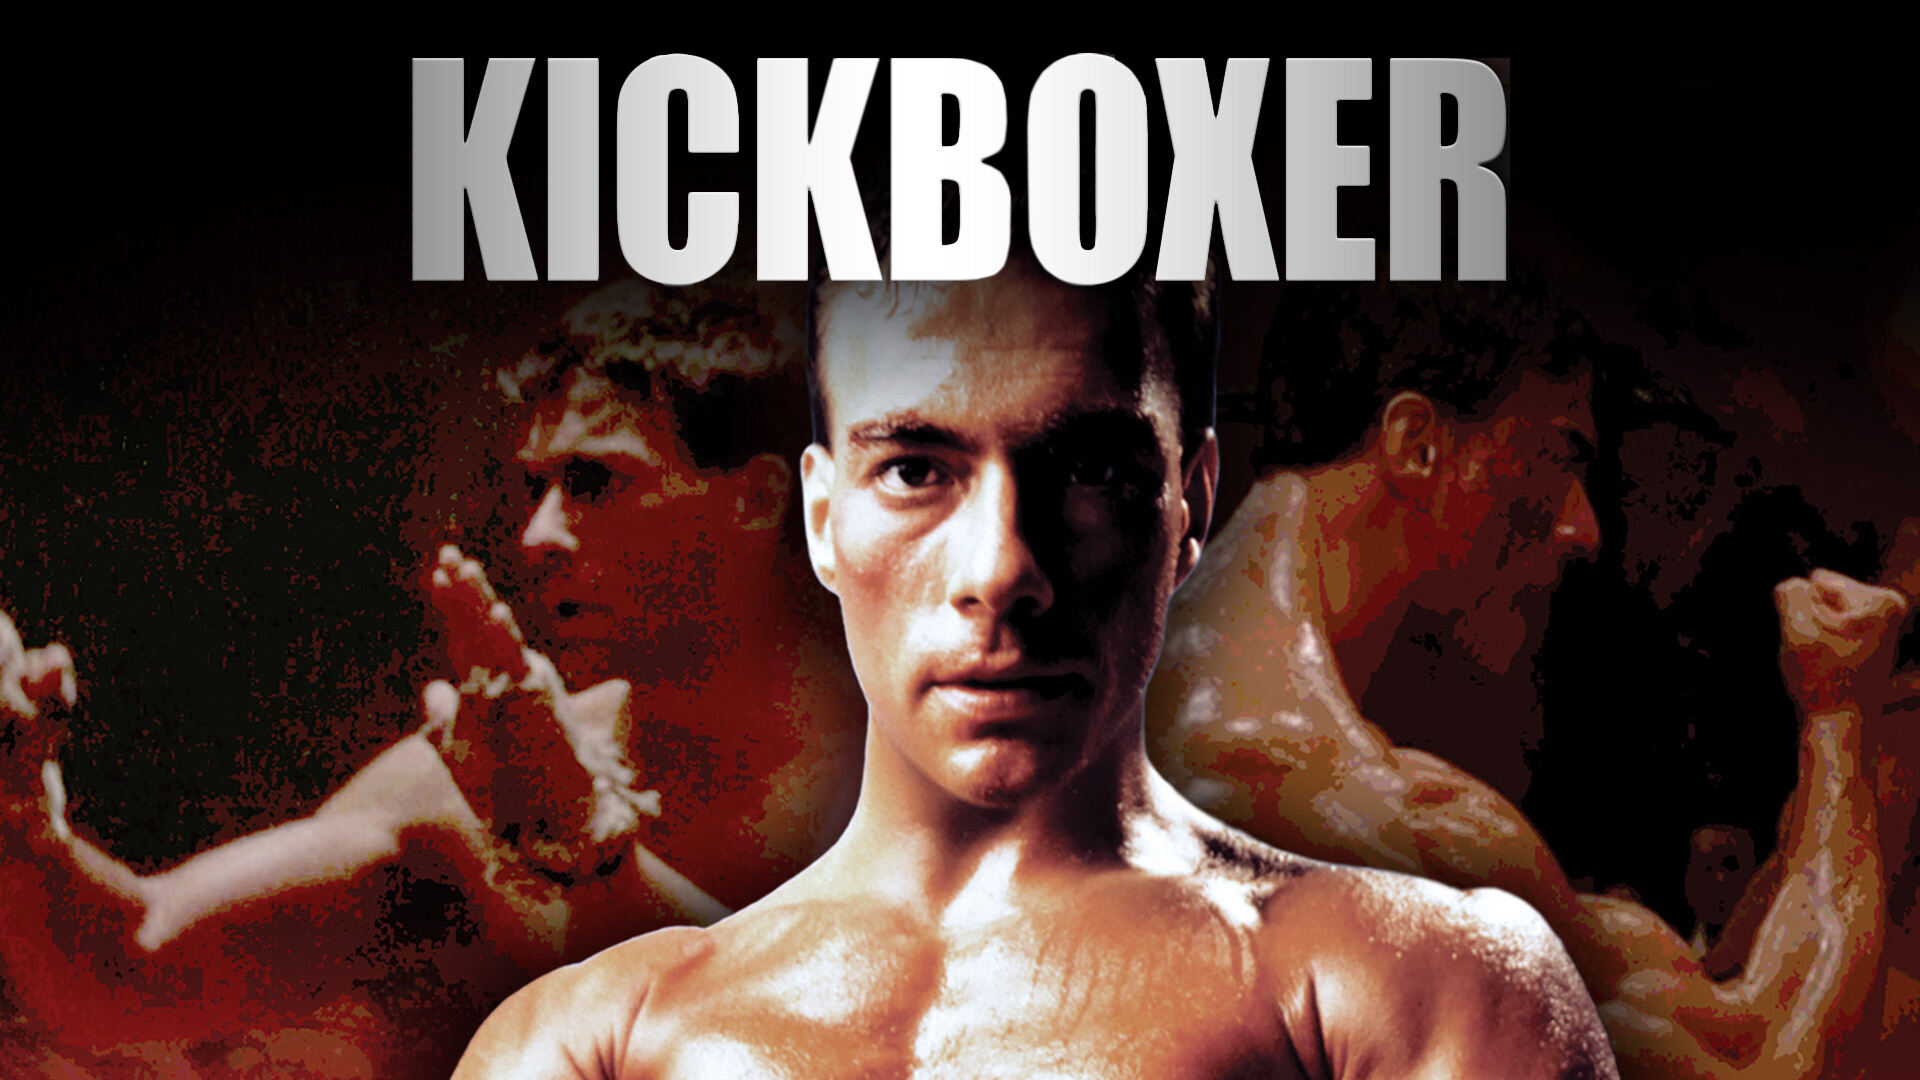 39-facts-about-the-movie-kickboxer